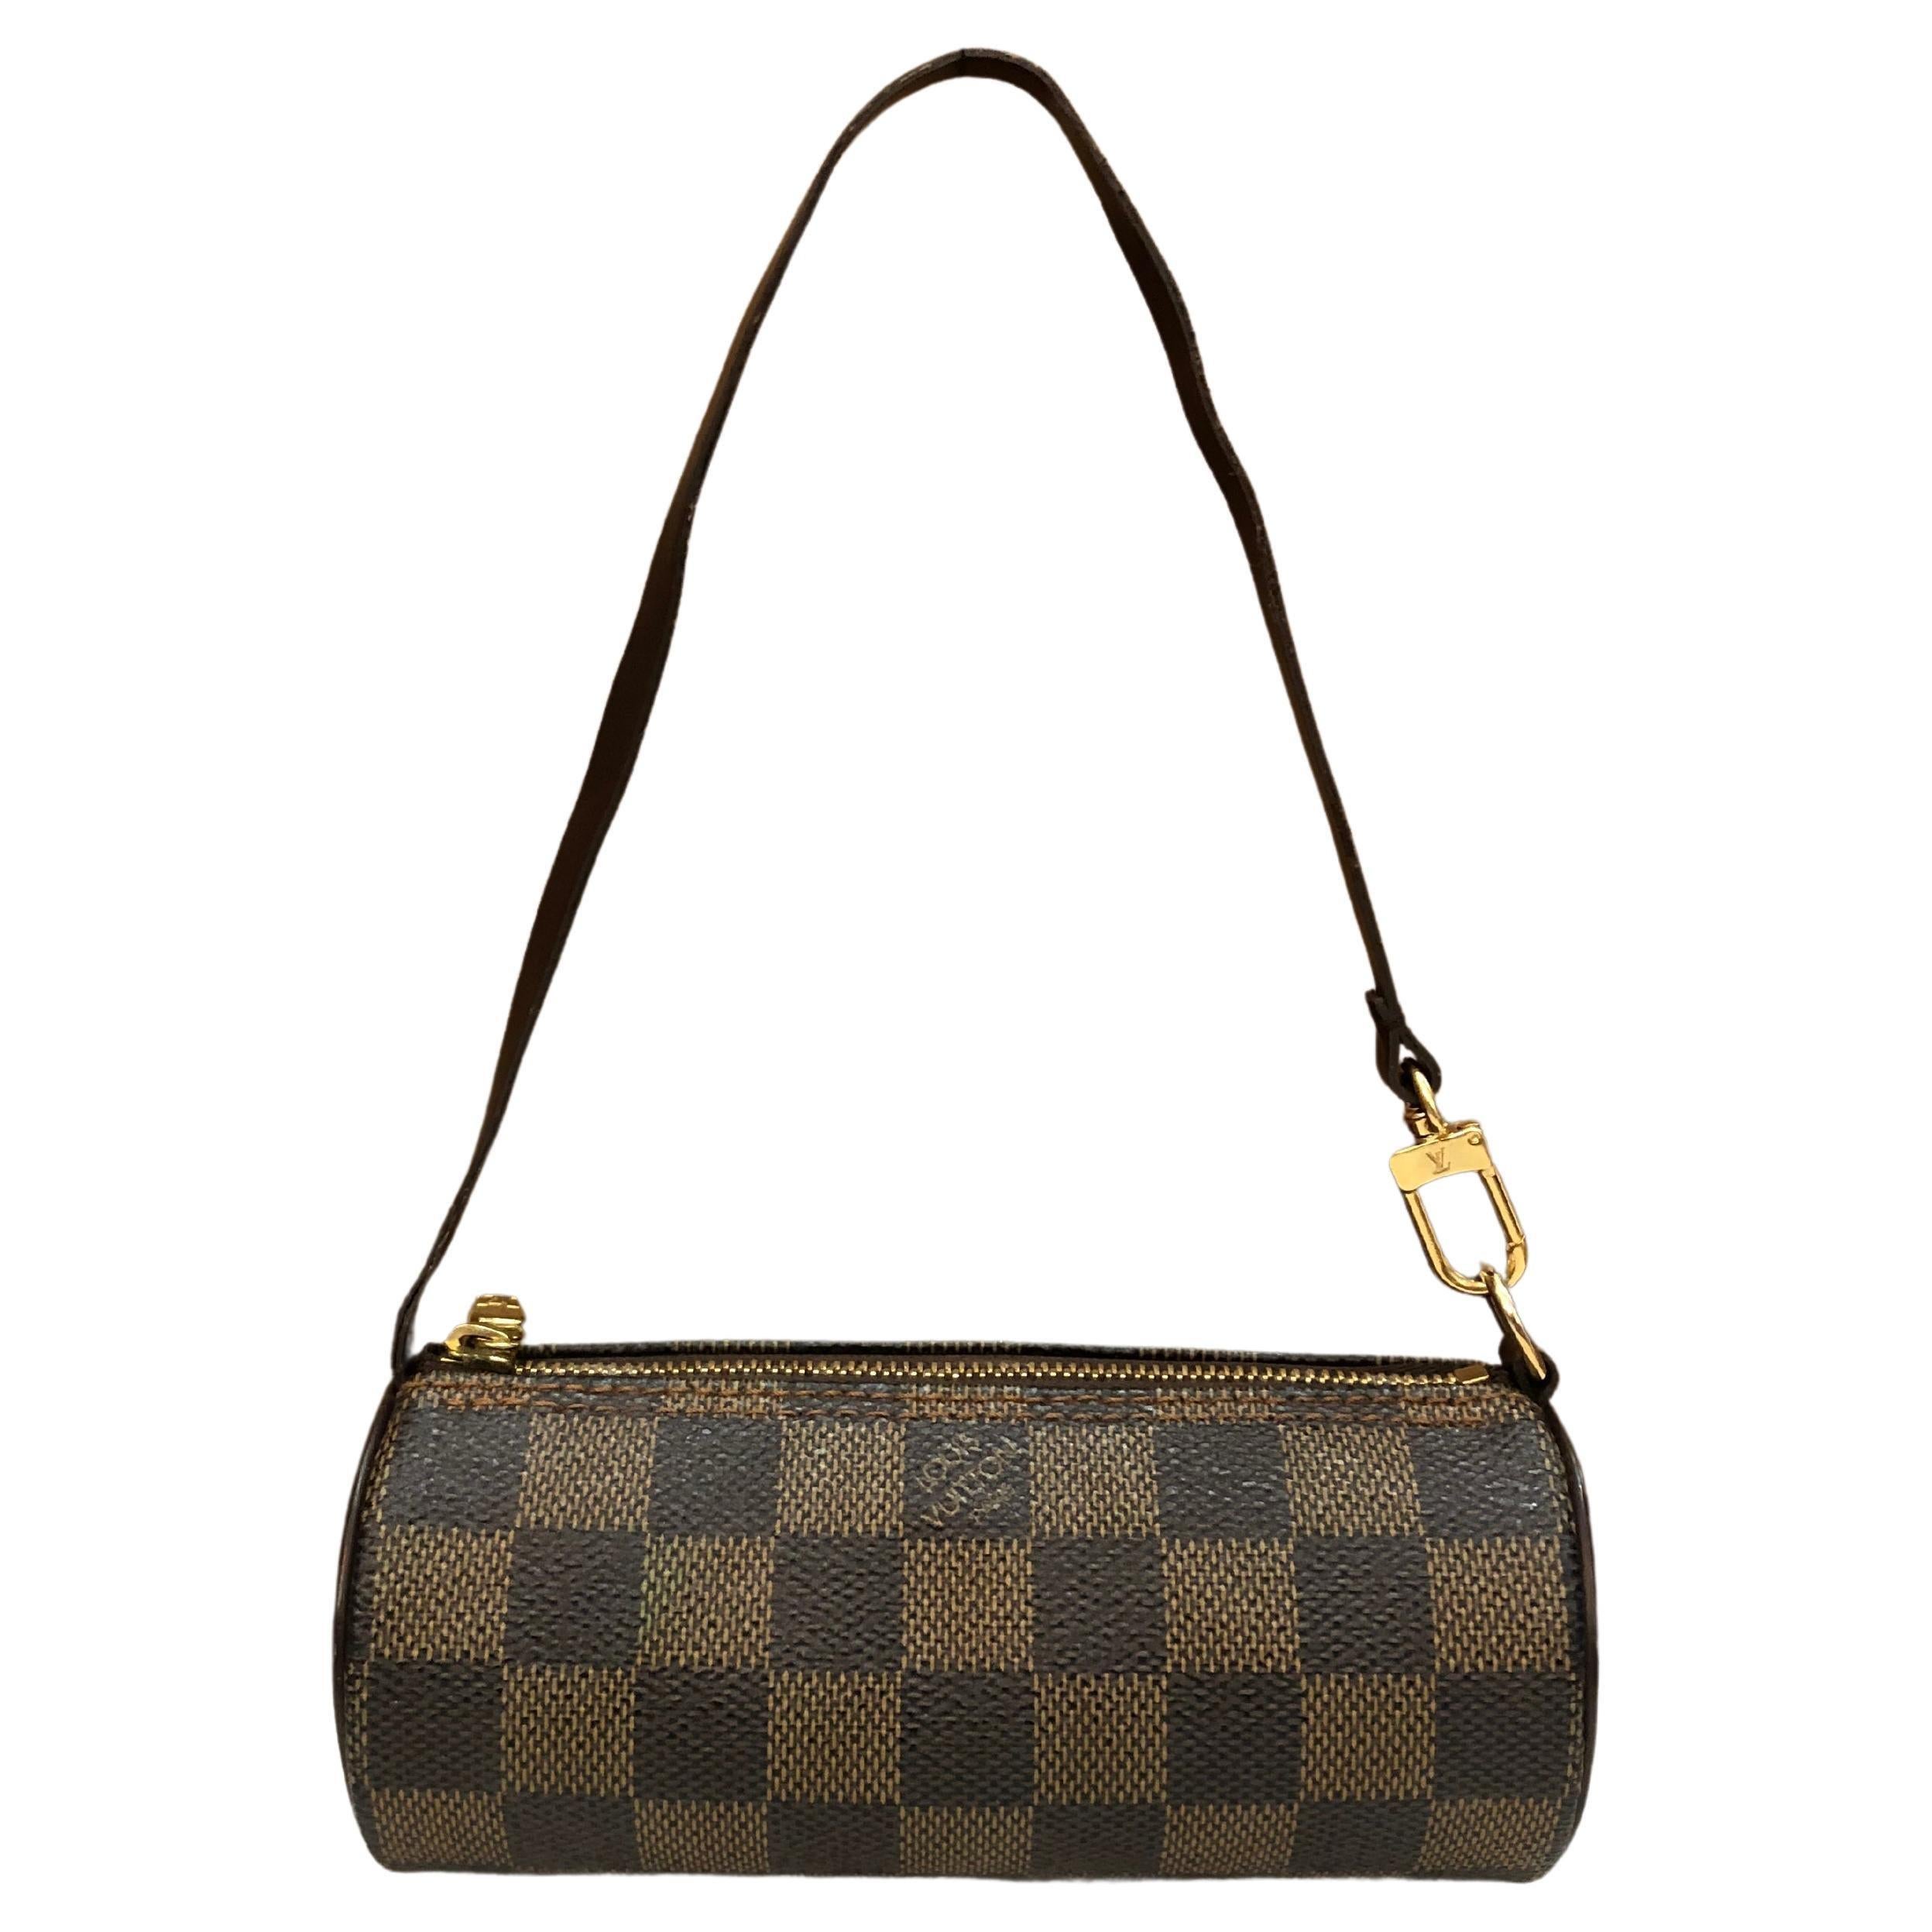 This LOUIS VUITTON mini Papillon pouch is crafted of LV’s Damier Ebene canvas and brown smooth leather. This mini papillon originally came with the mother papillon with datecode stamped on the mother papillon and so this mini papillon pouch does not